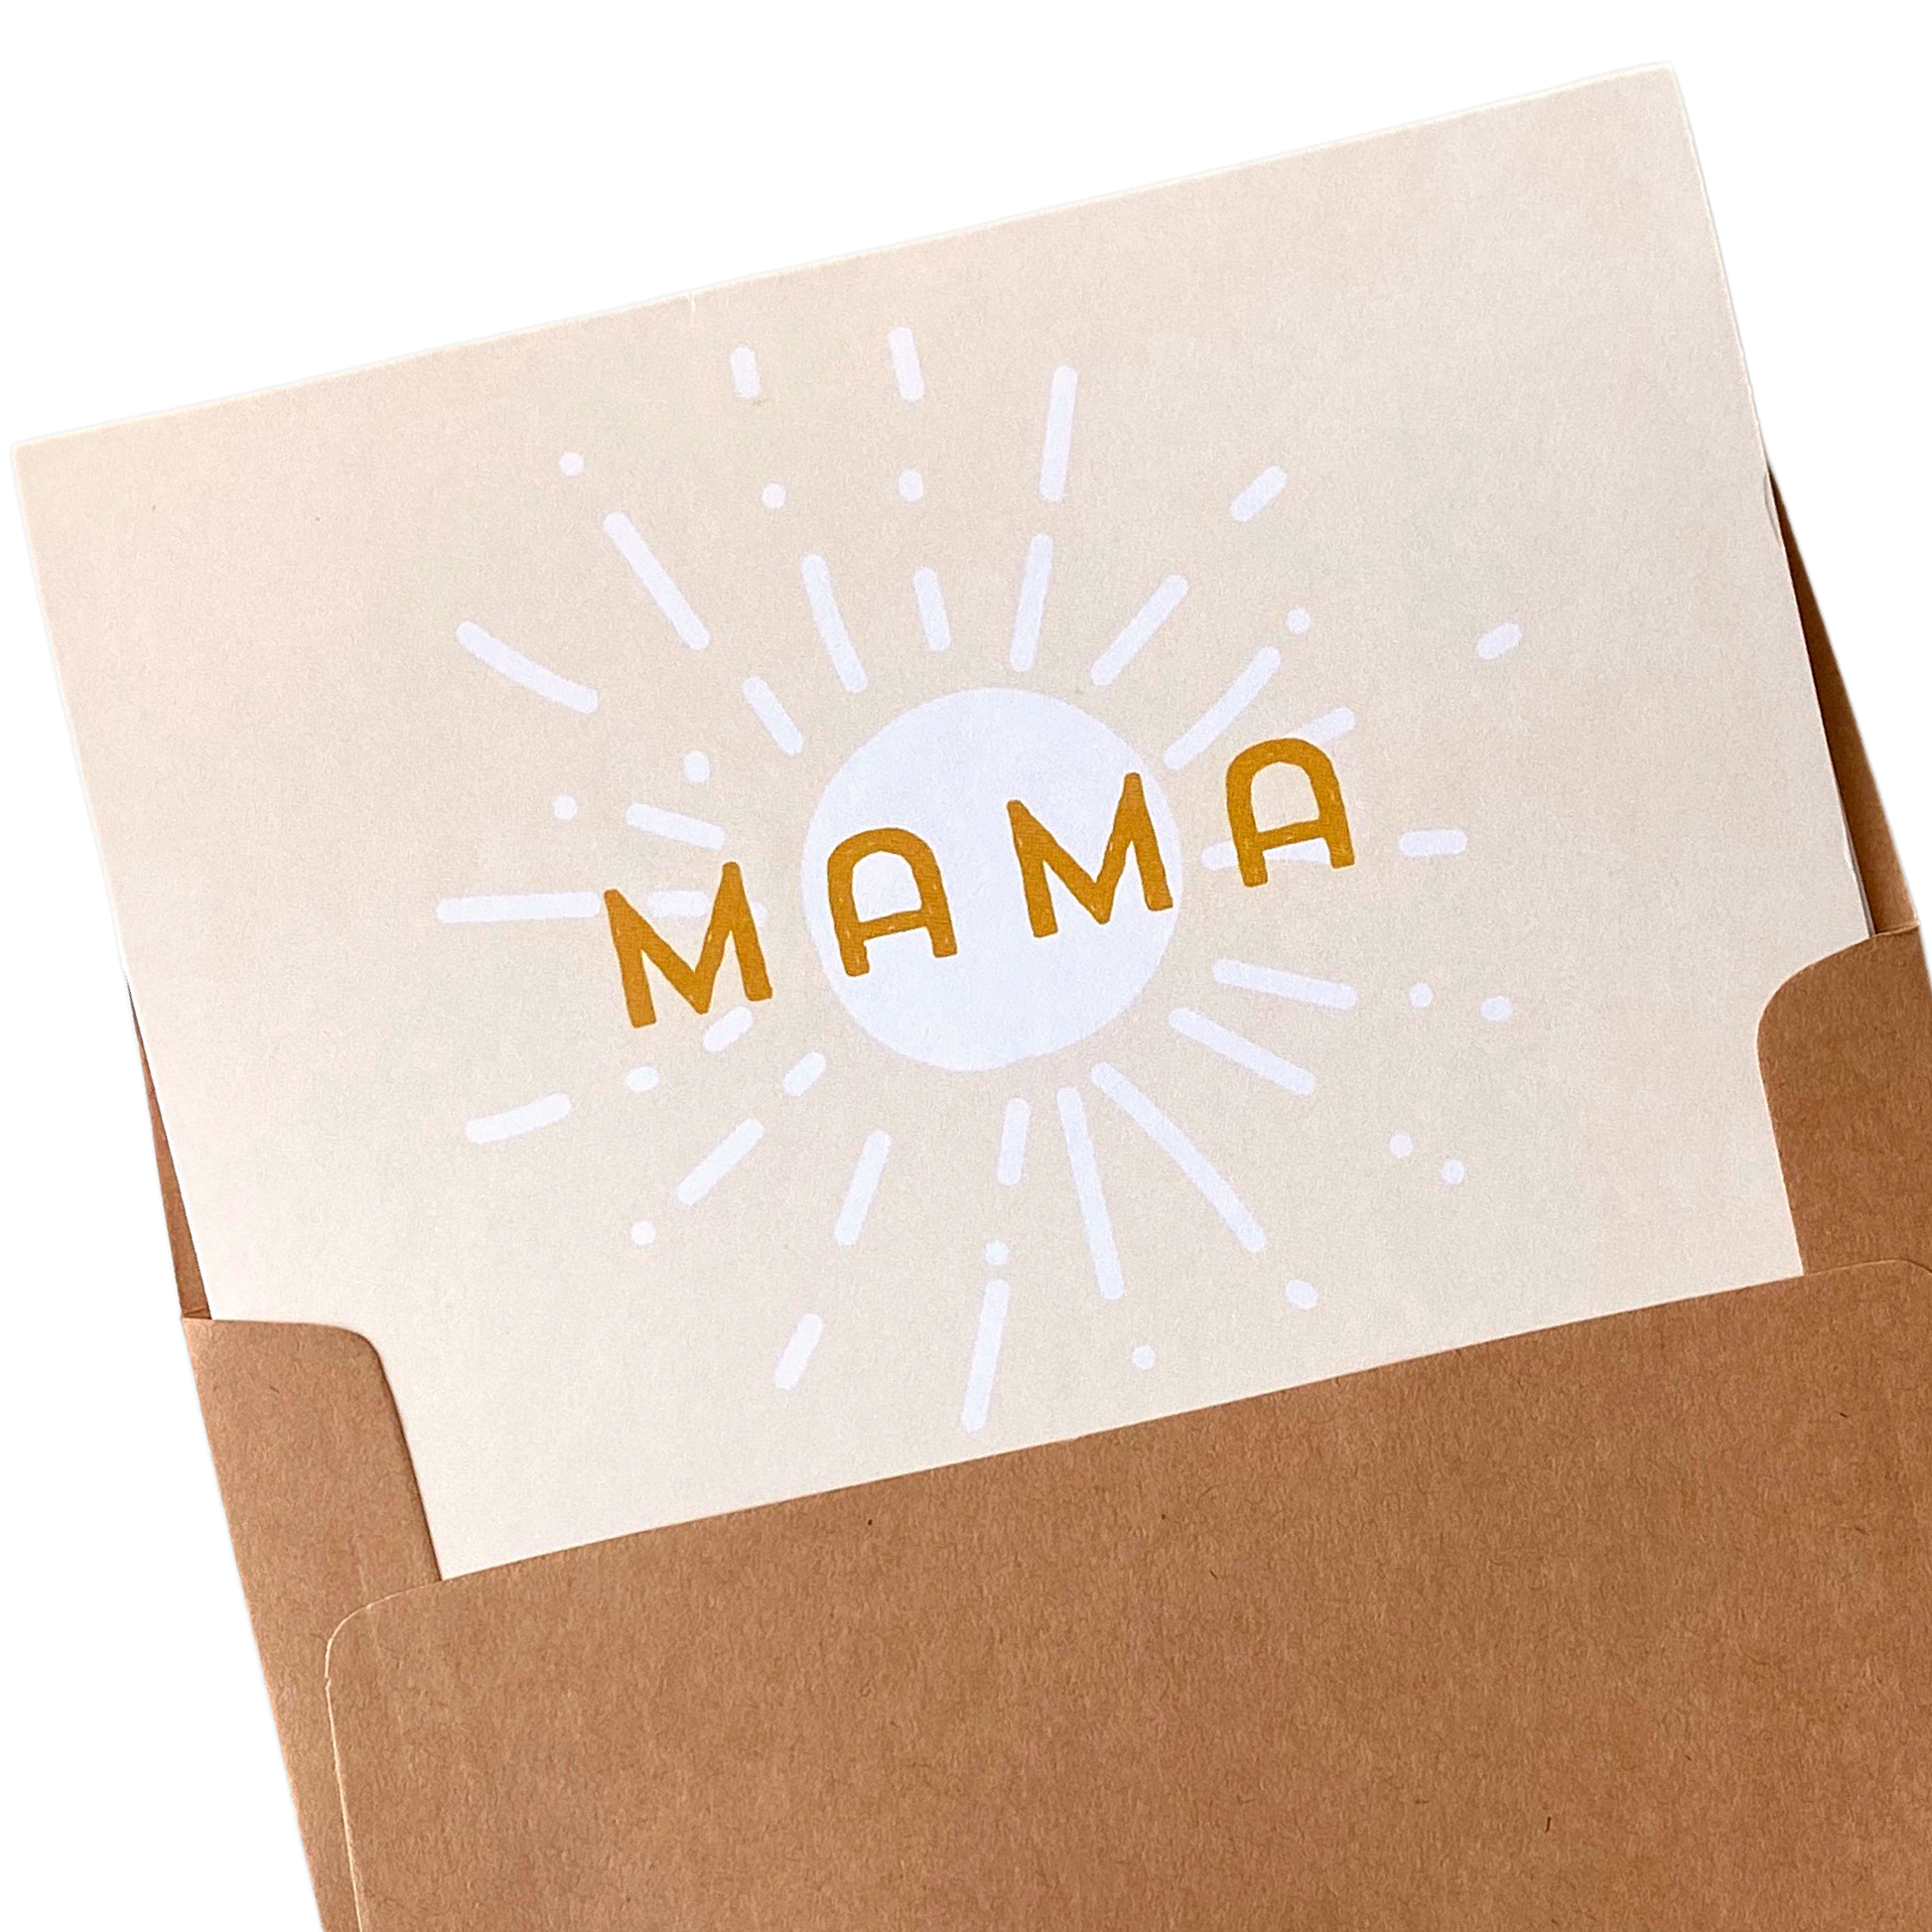 Mama Greeting Card - The Crowd Went Wild